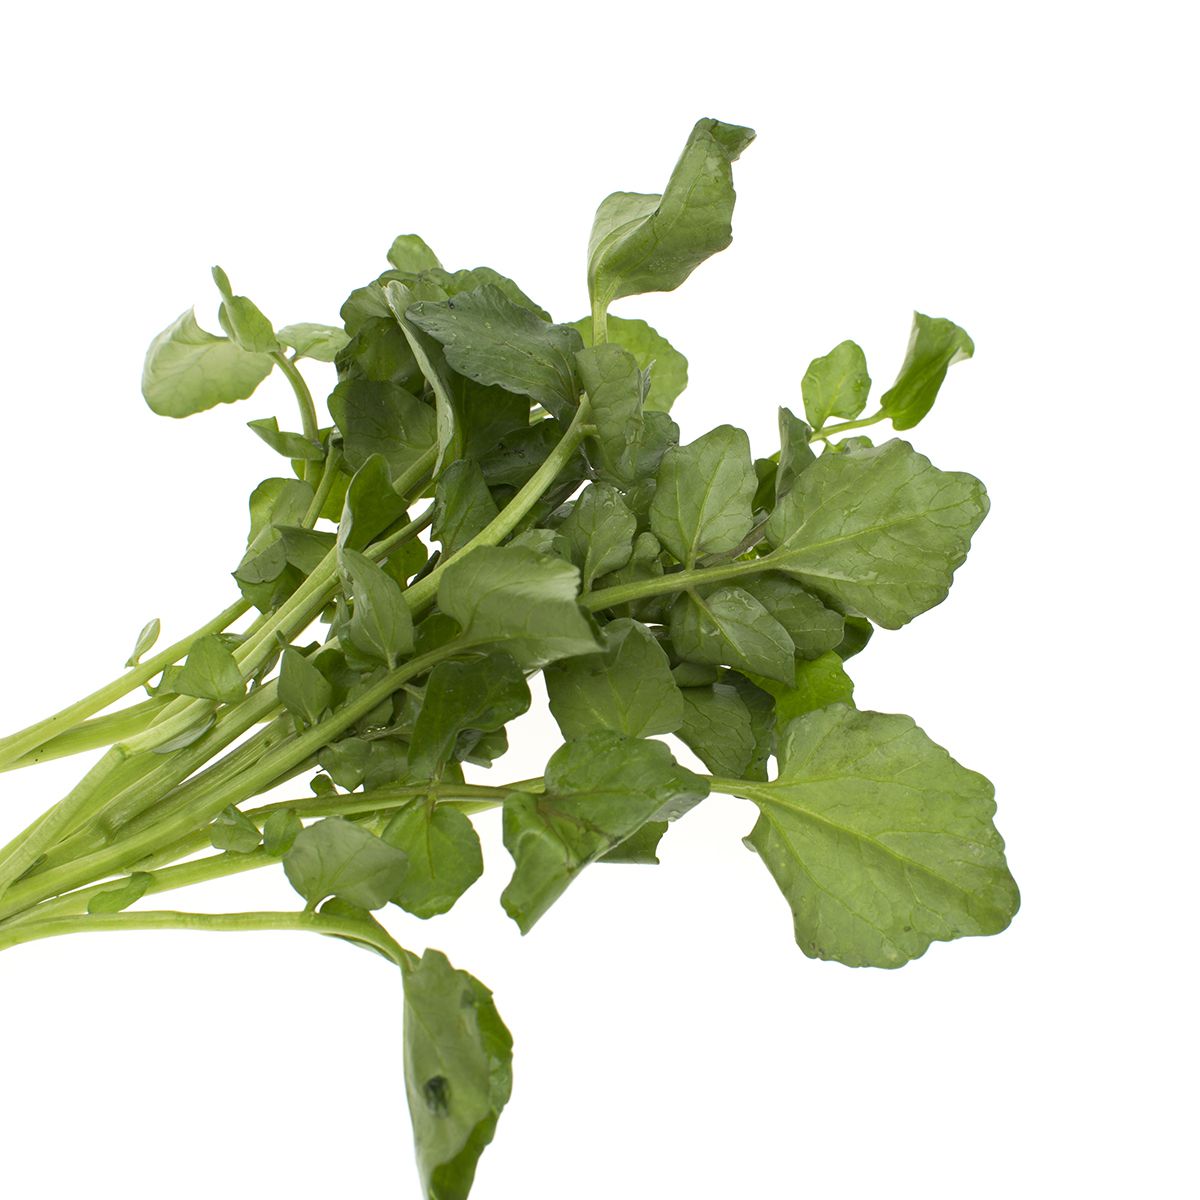 B&W Bunched Watercress 24 ct